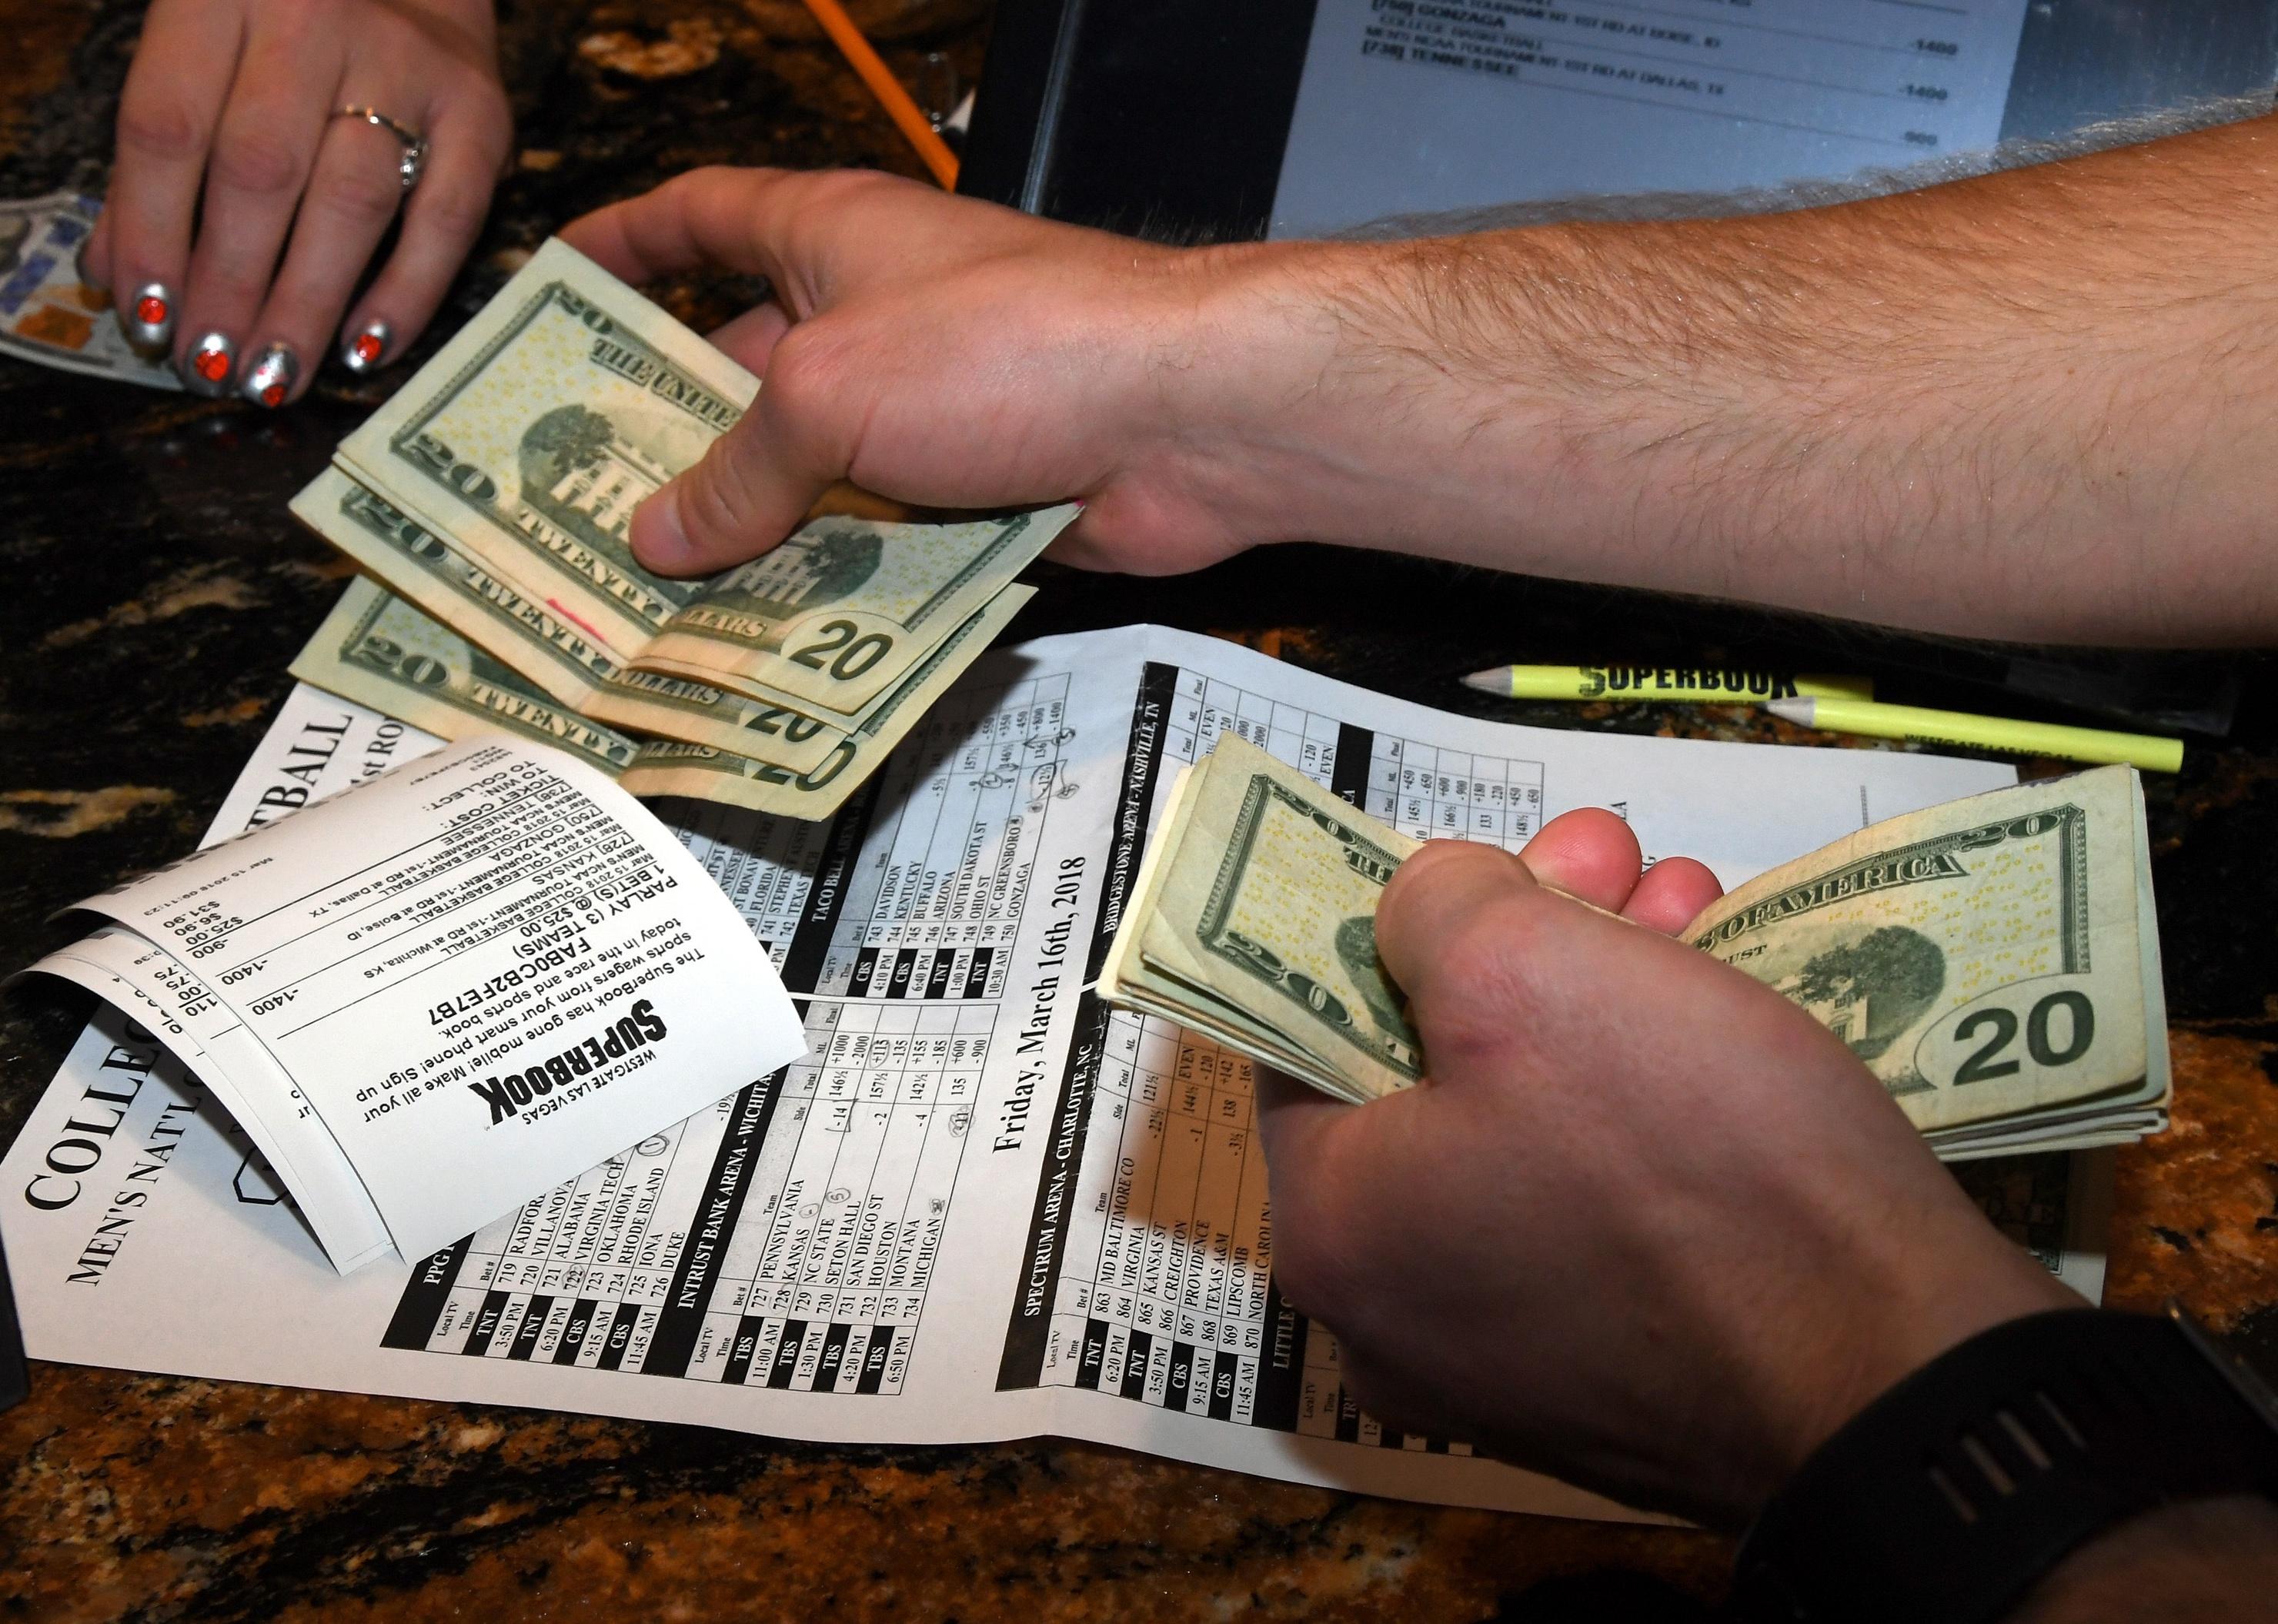 Man makes bets during a viewing party for the NCAA Men's College Basketball Tournament.